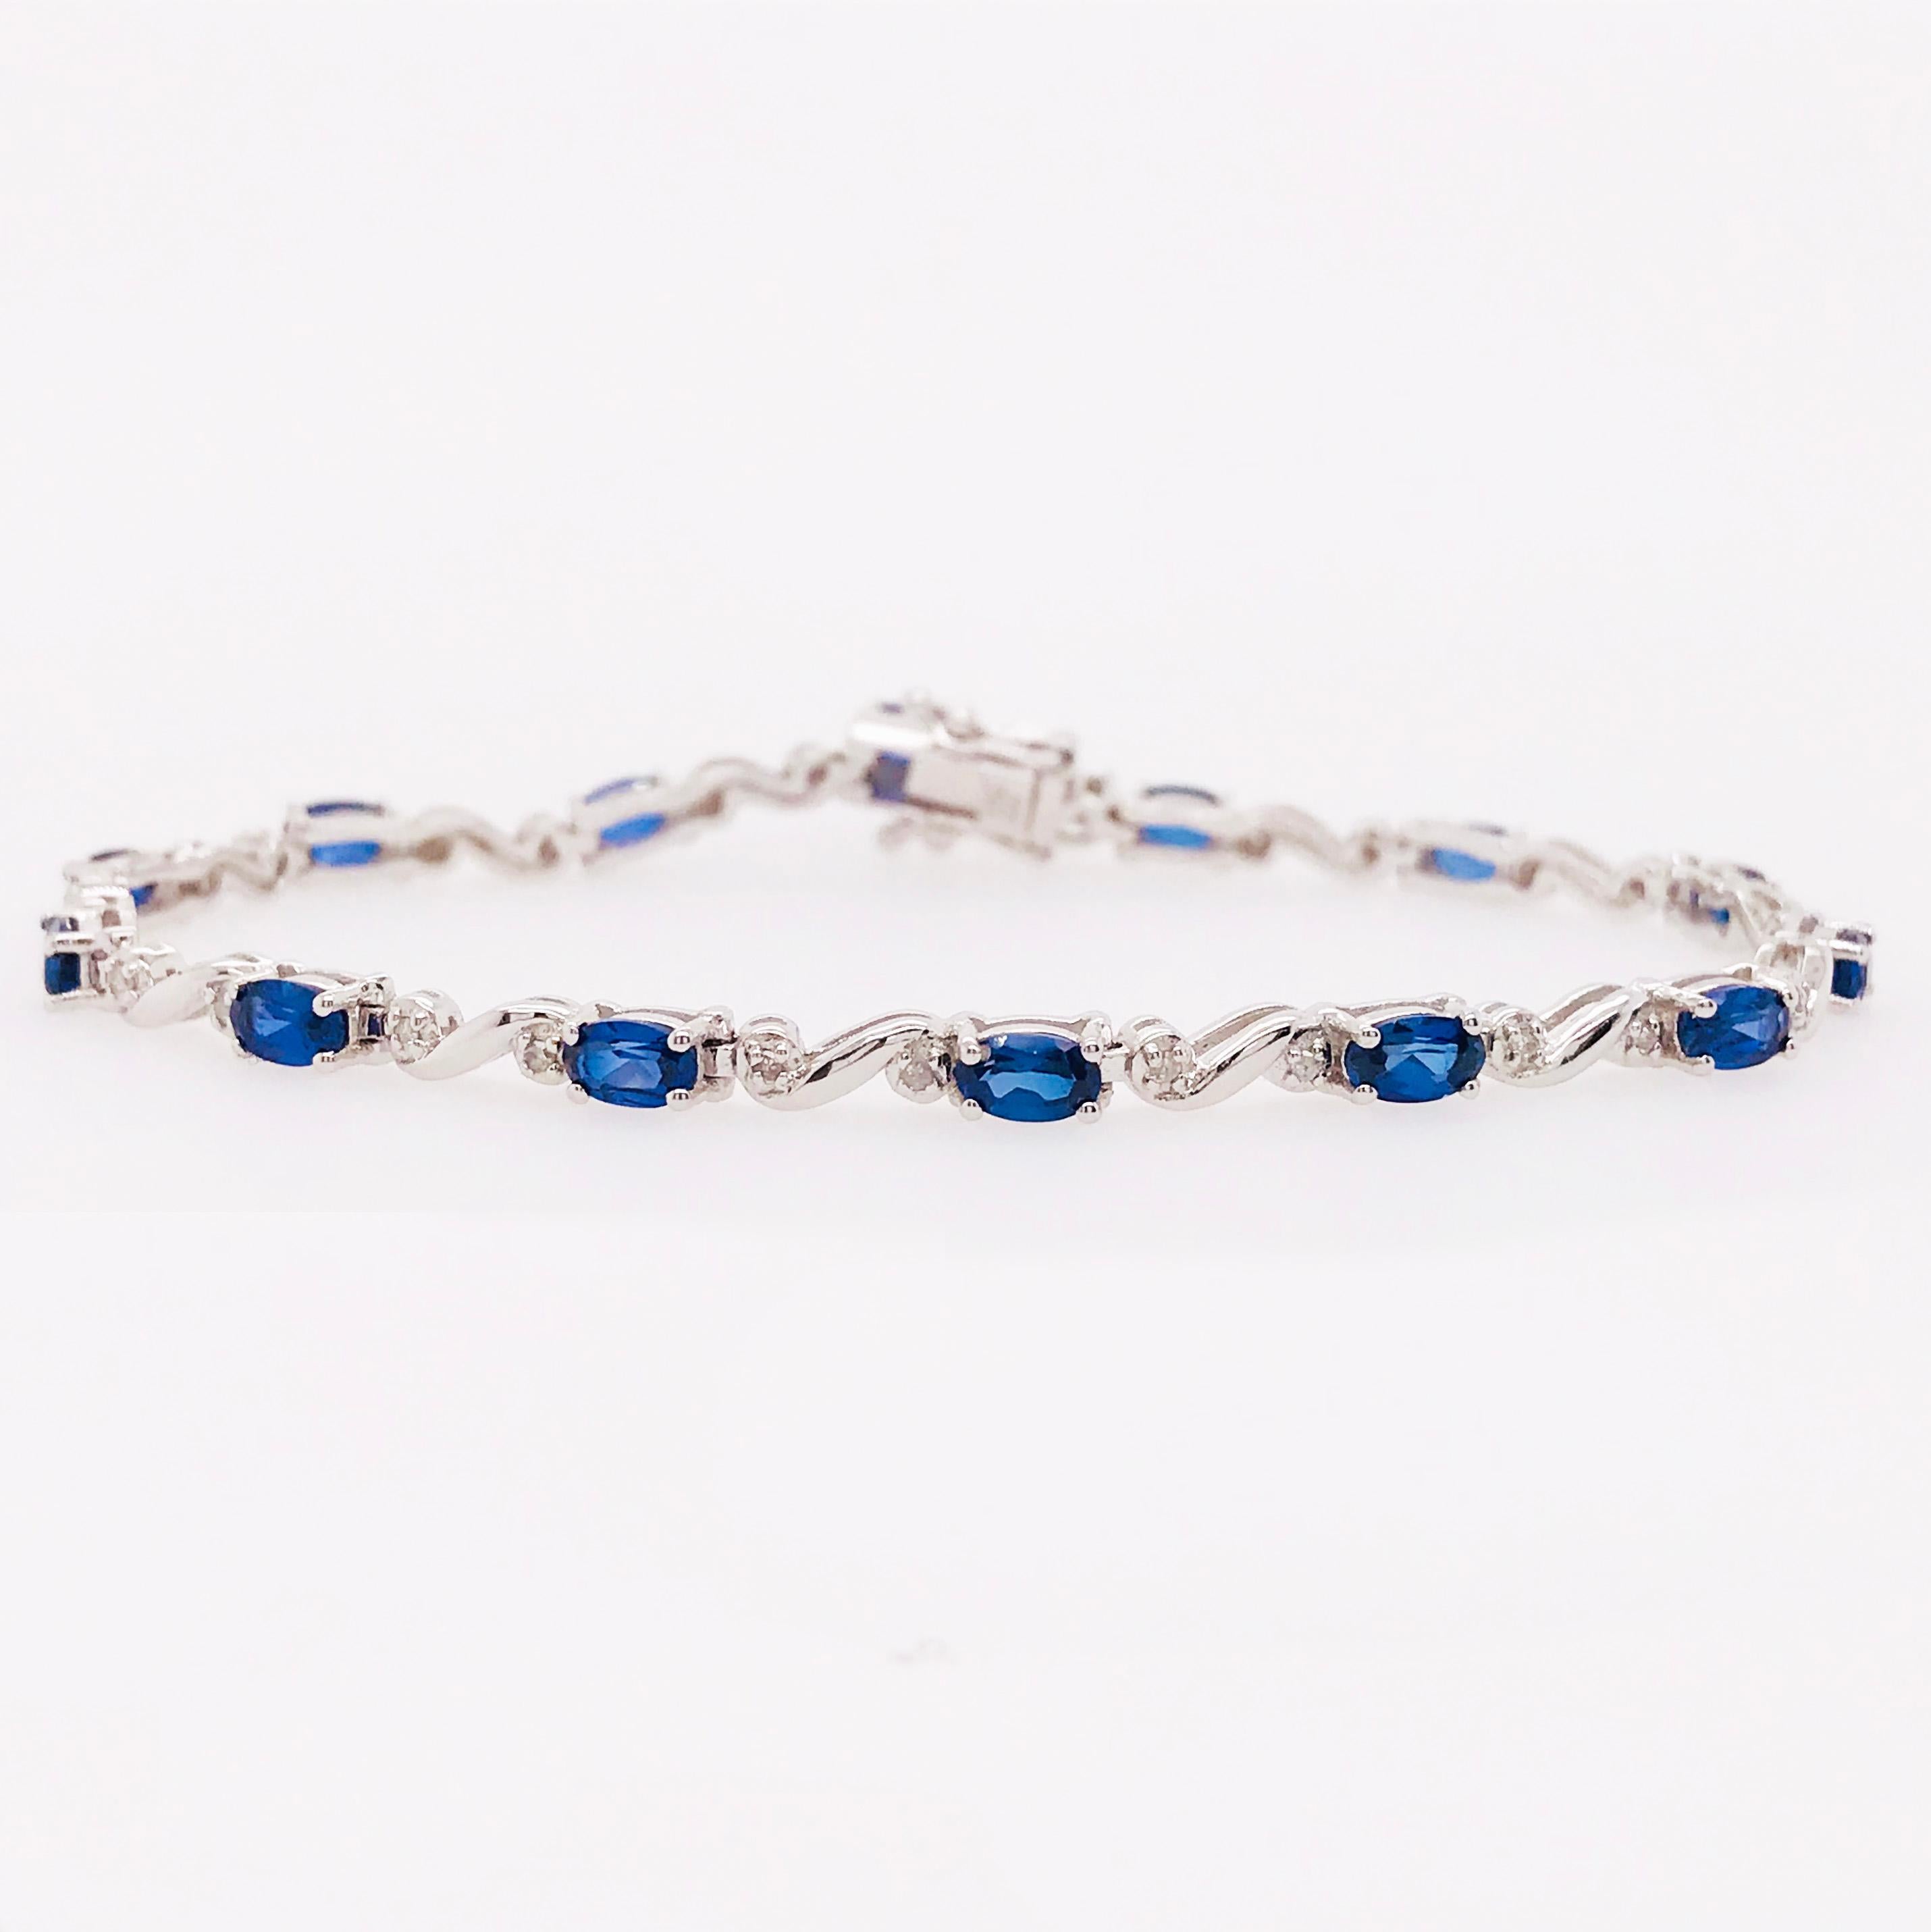 This is a traditional tennis bracelet with genuine blue sapphire gemstones and natural round brilliant diamonds. With oval blue sapphires set in between a whimsical  14K white gold diamond design. Each sapphire has been hand picked to match the